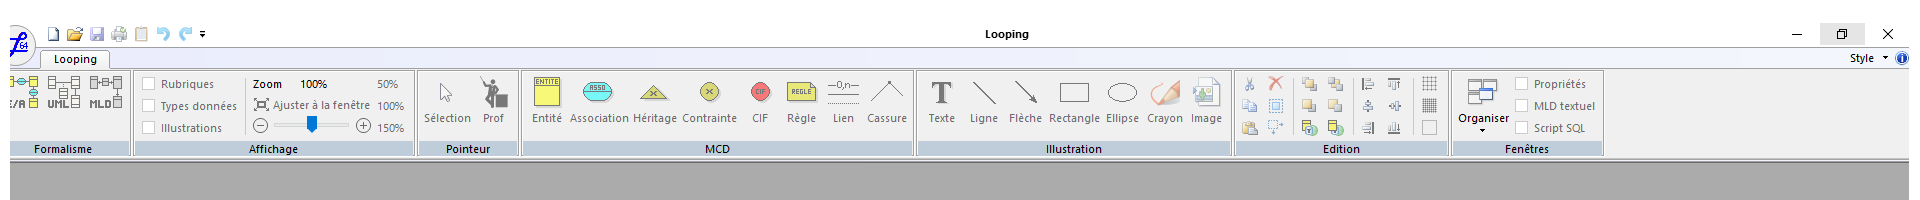 Nom : looping.png
Affichages : 112
Taille : 31,3 Ko